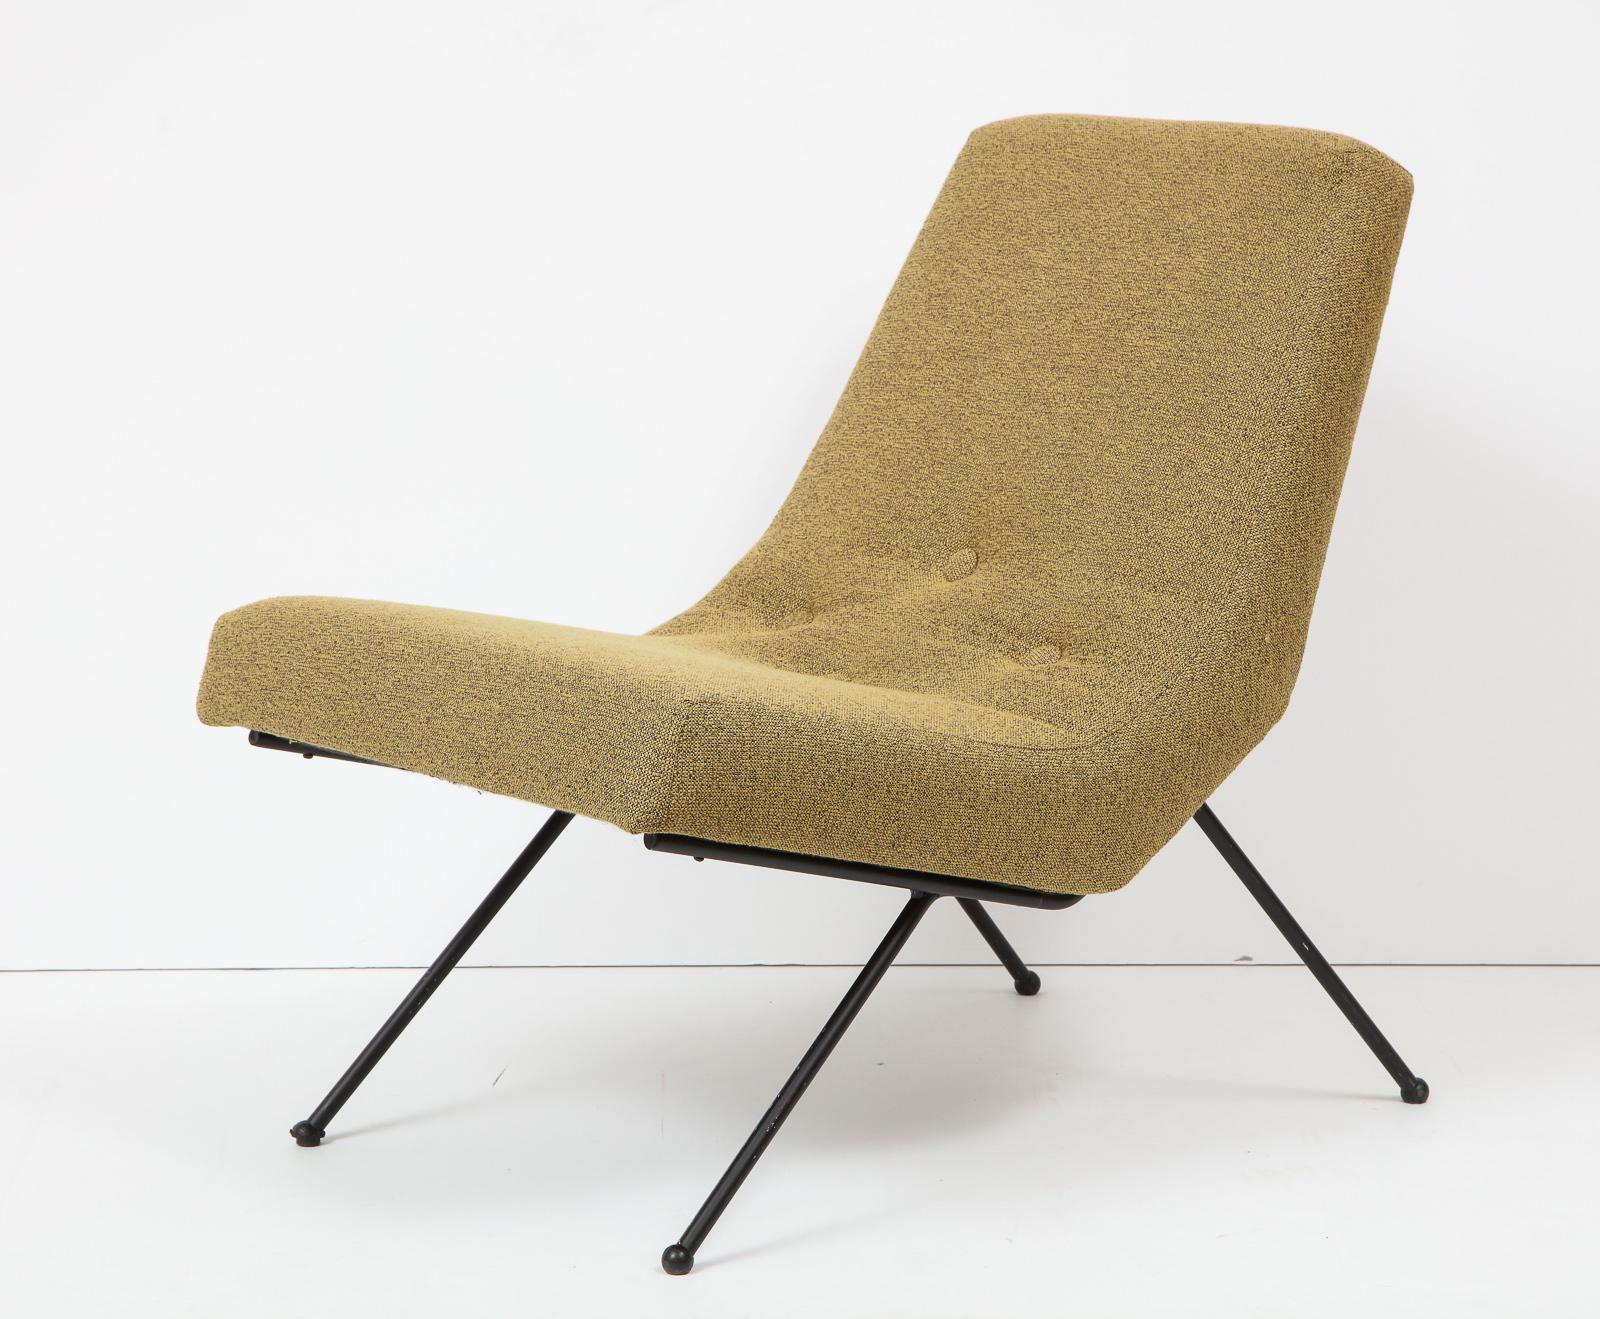 Mid-Century Modern Sculptural Adrian Pearsall Lounge Chair for Craft Associates